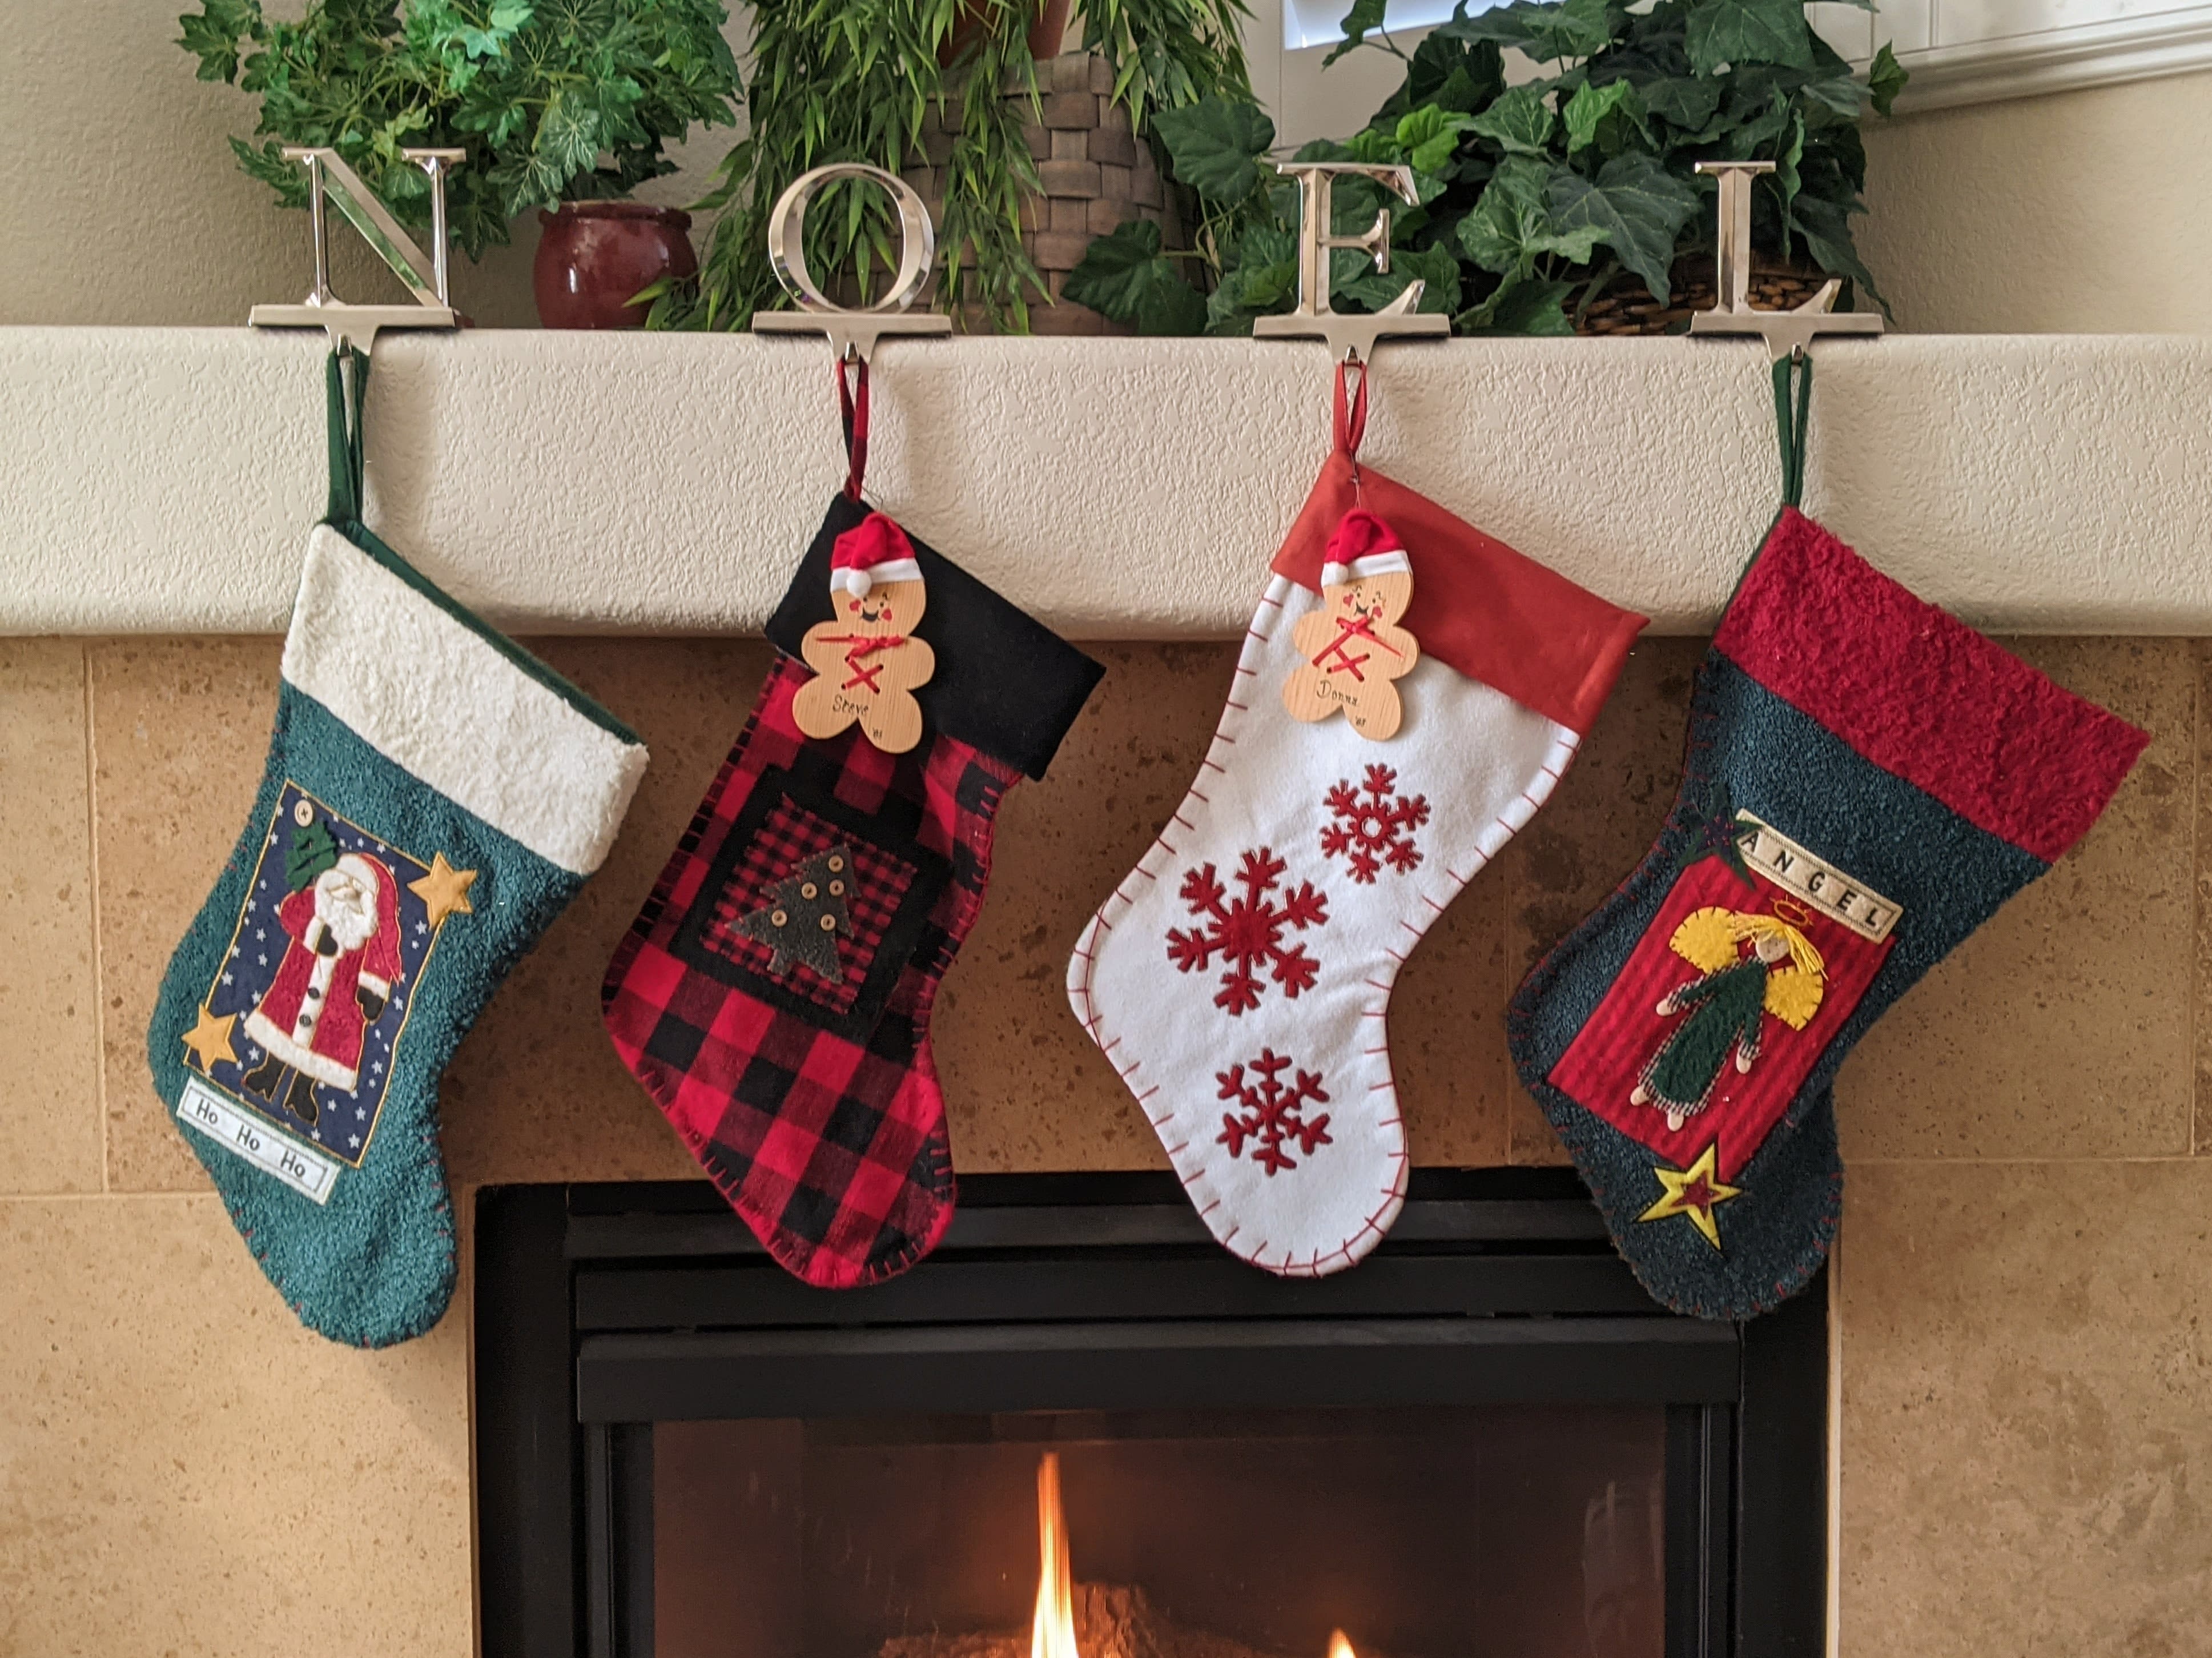 Christmas Stockings hanging on a fireplace